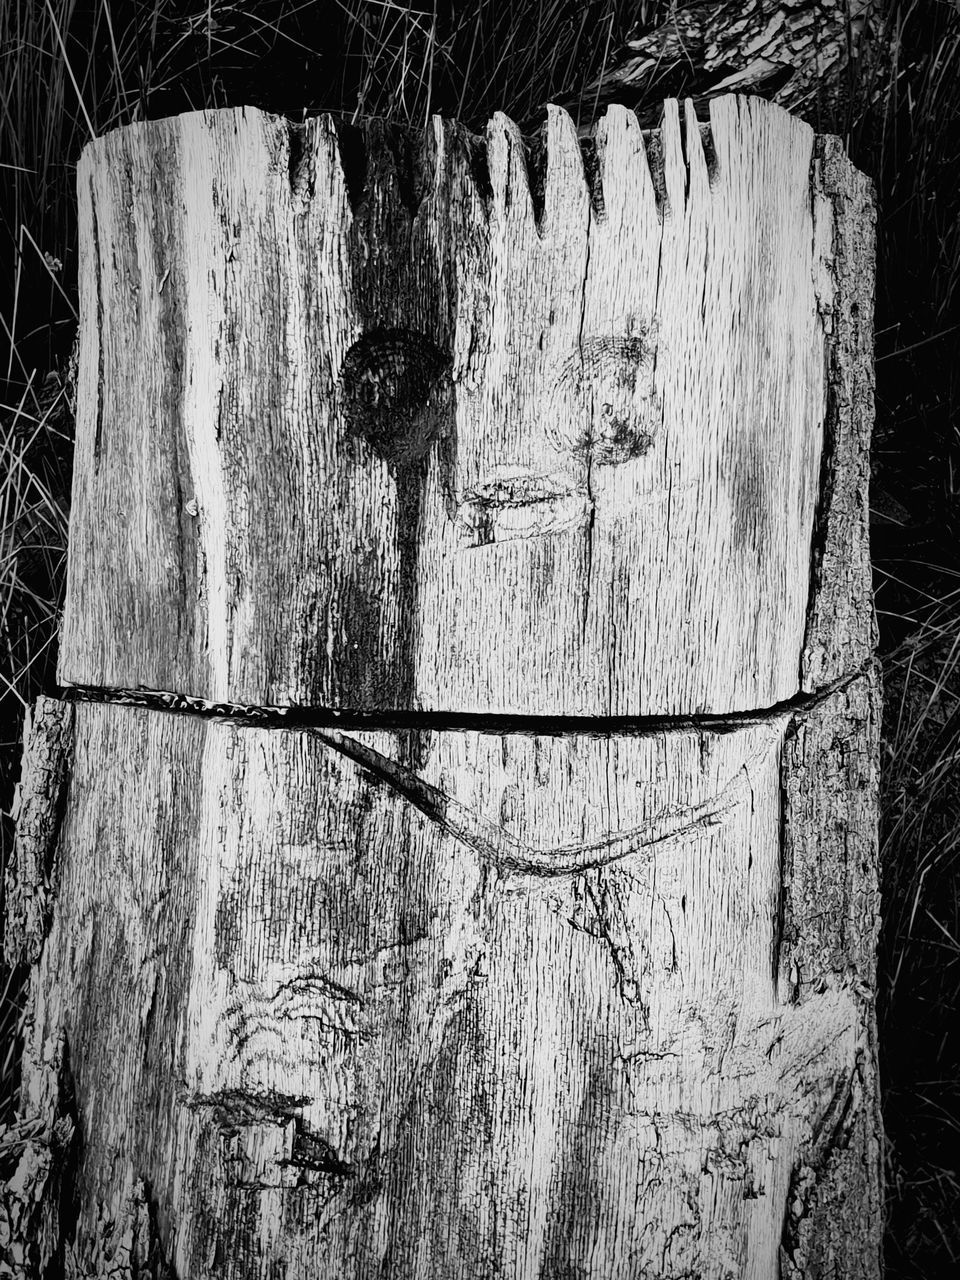 CLOSE-UP OF OLD WOODEN POST